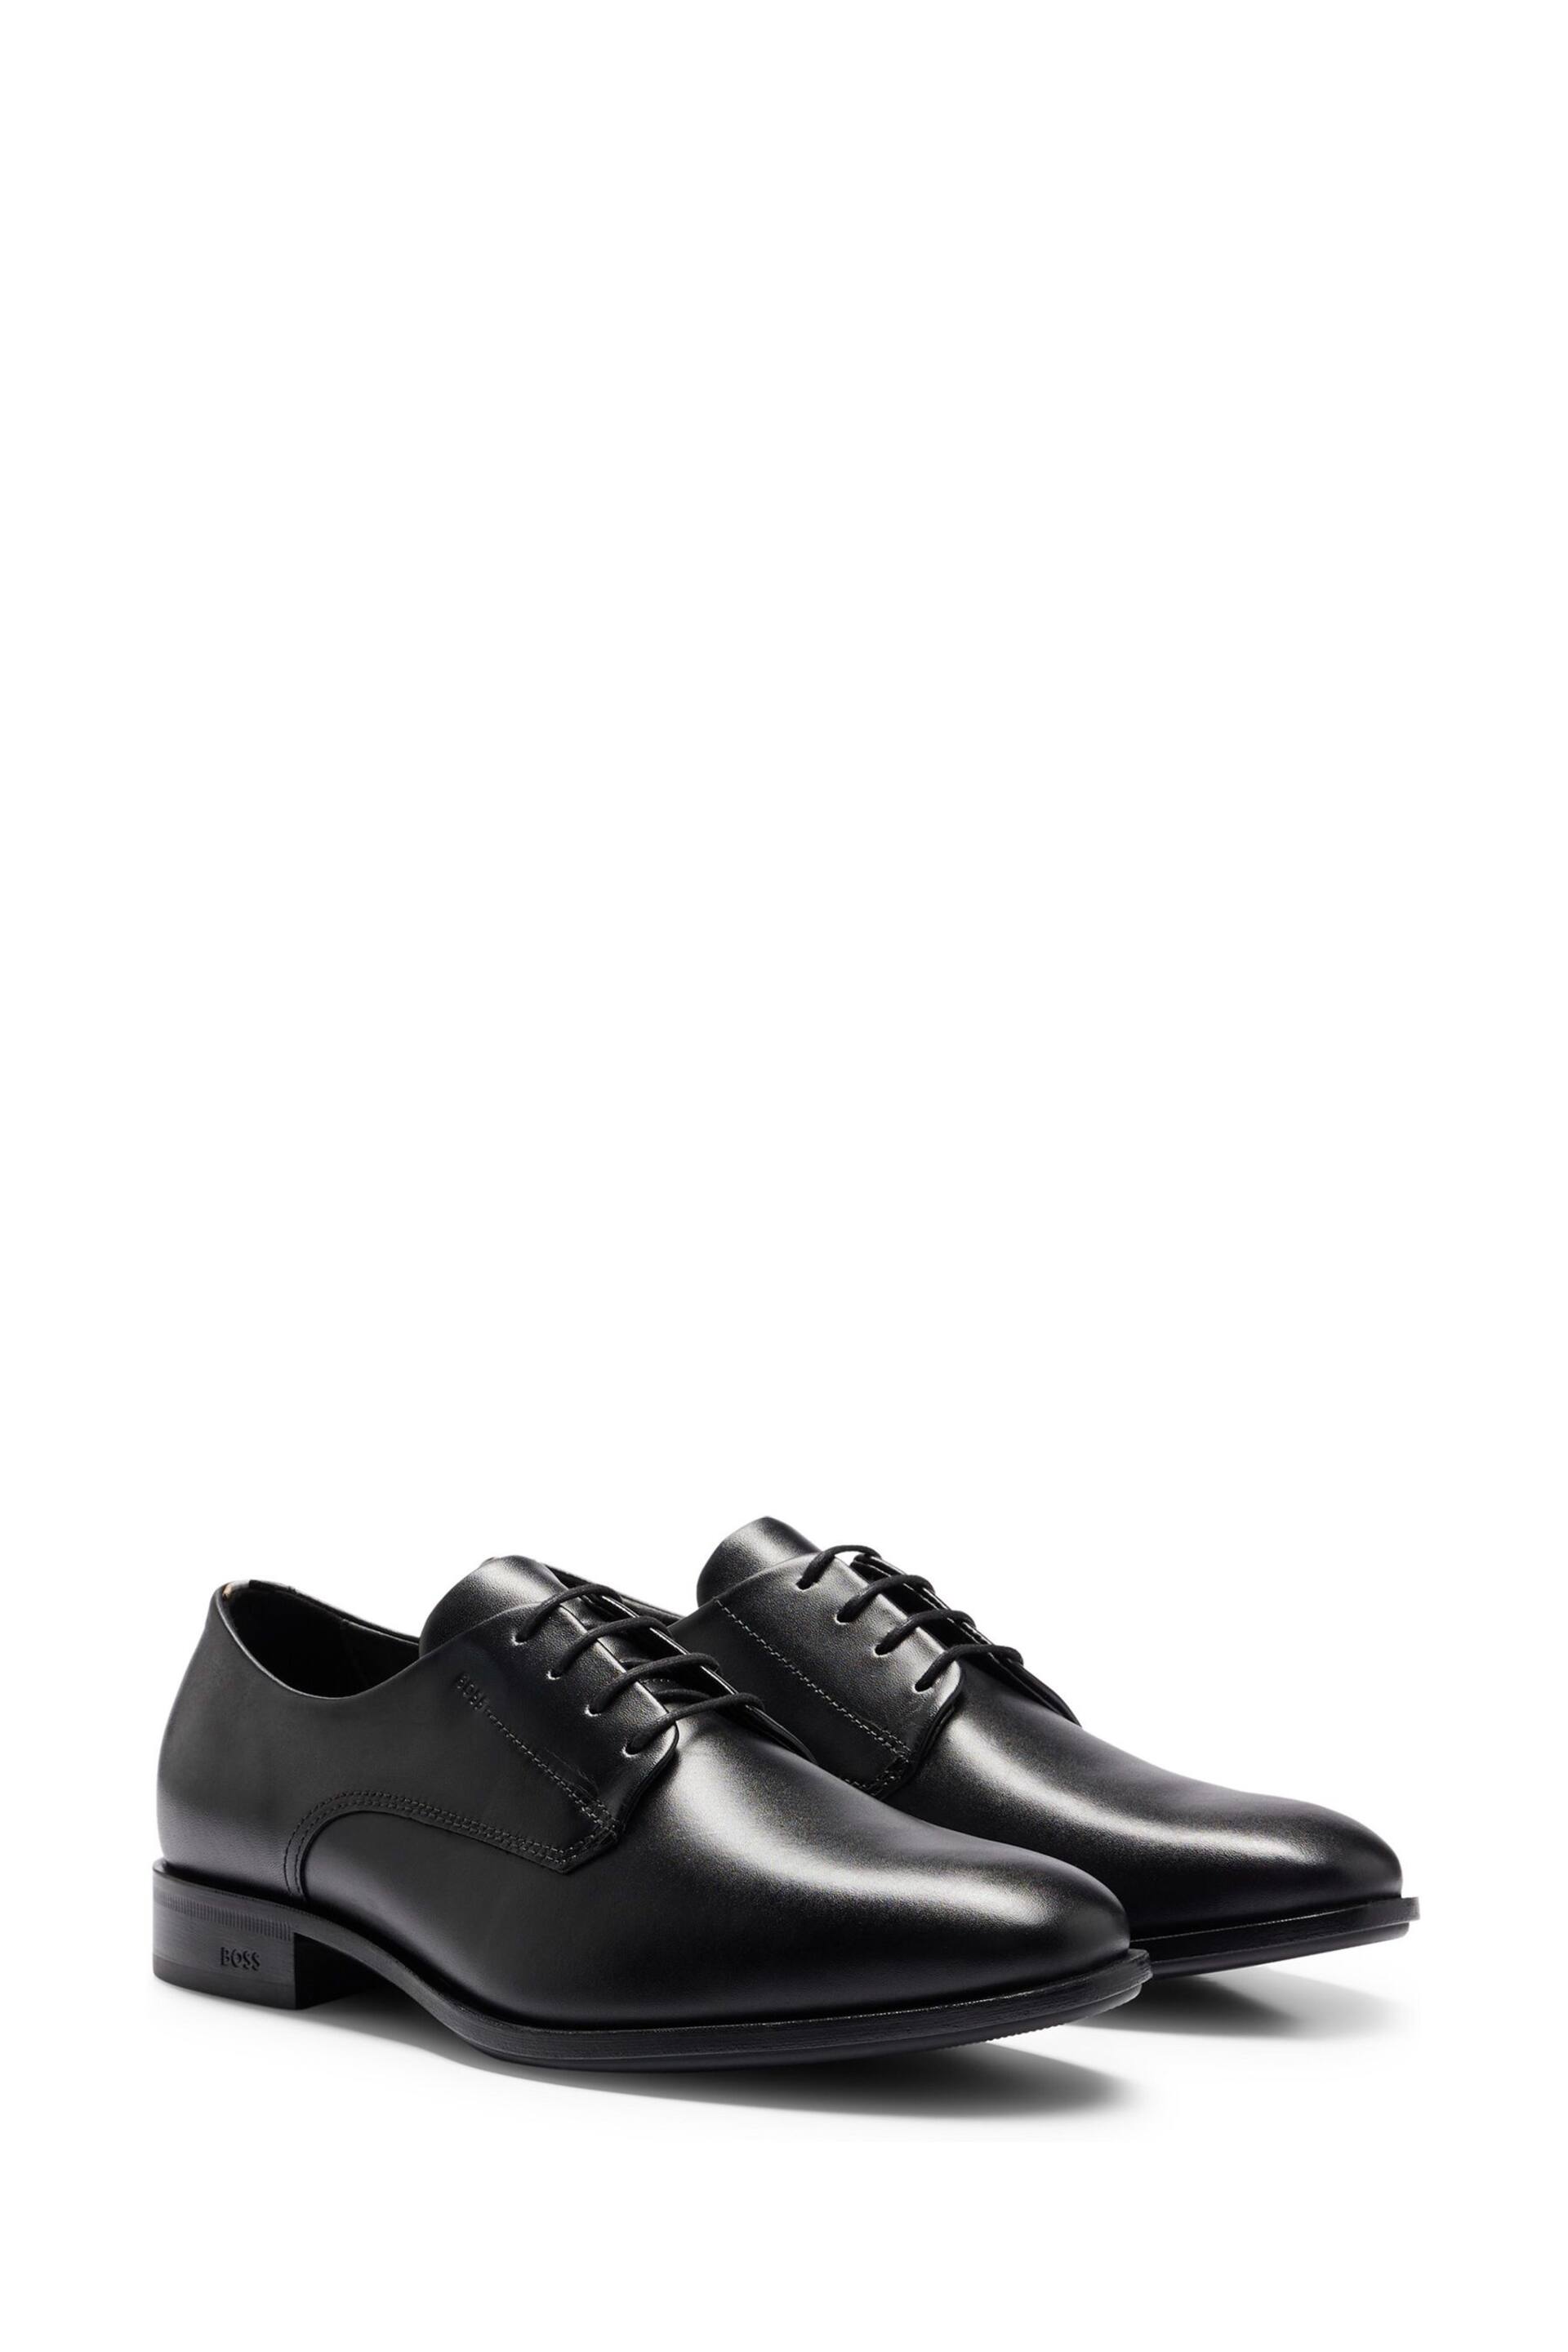 BOSS Black Colby Shoes - Image 2 of 4